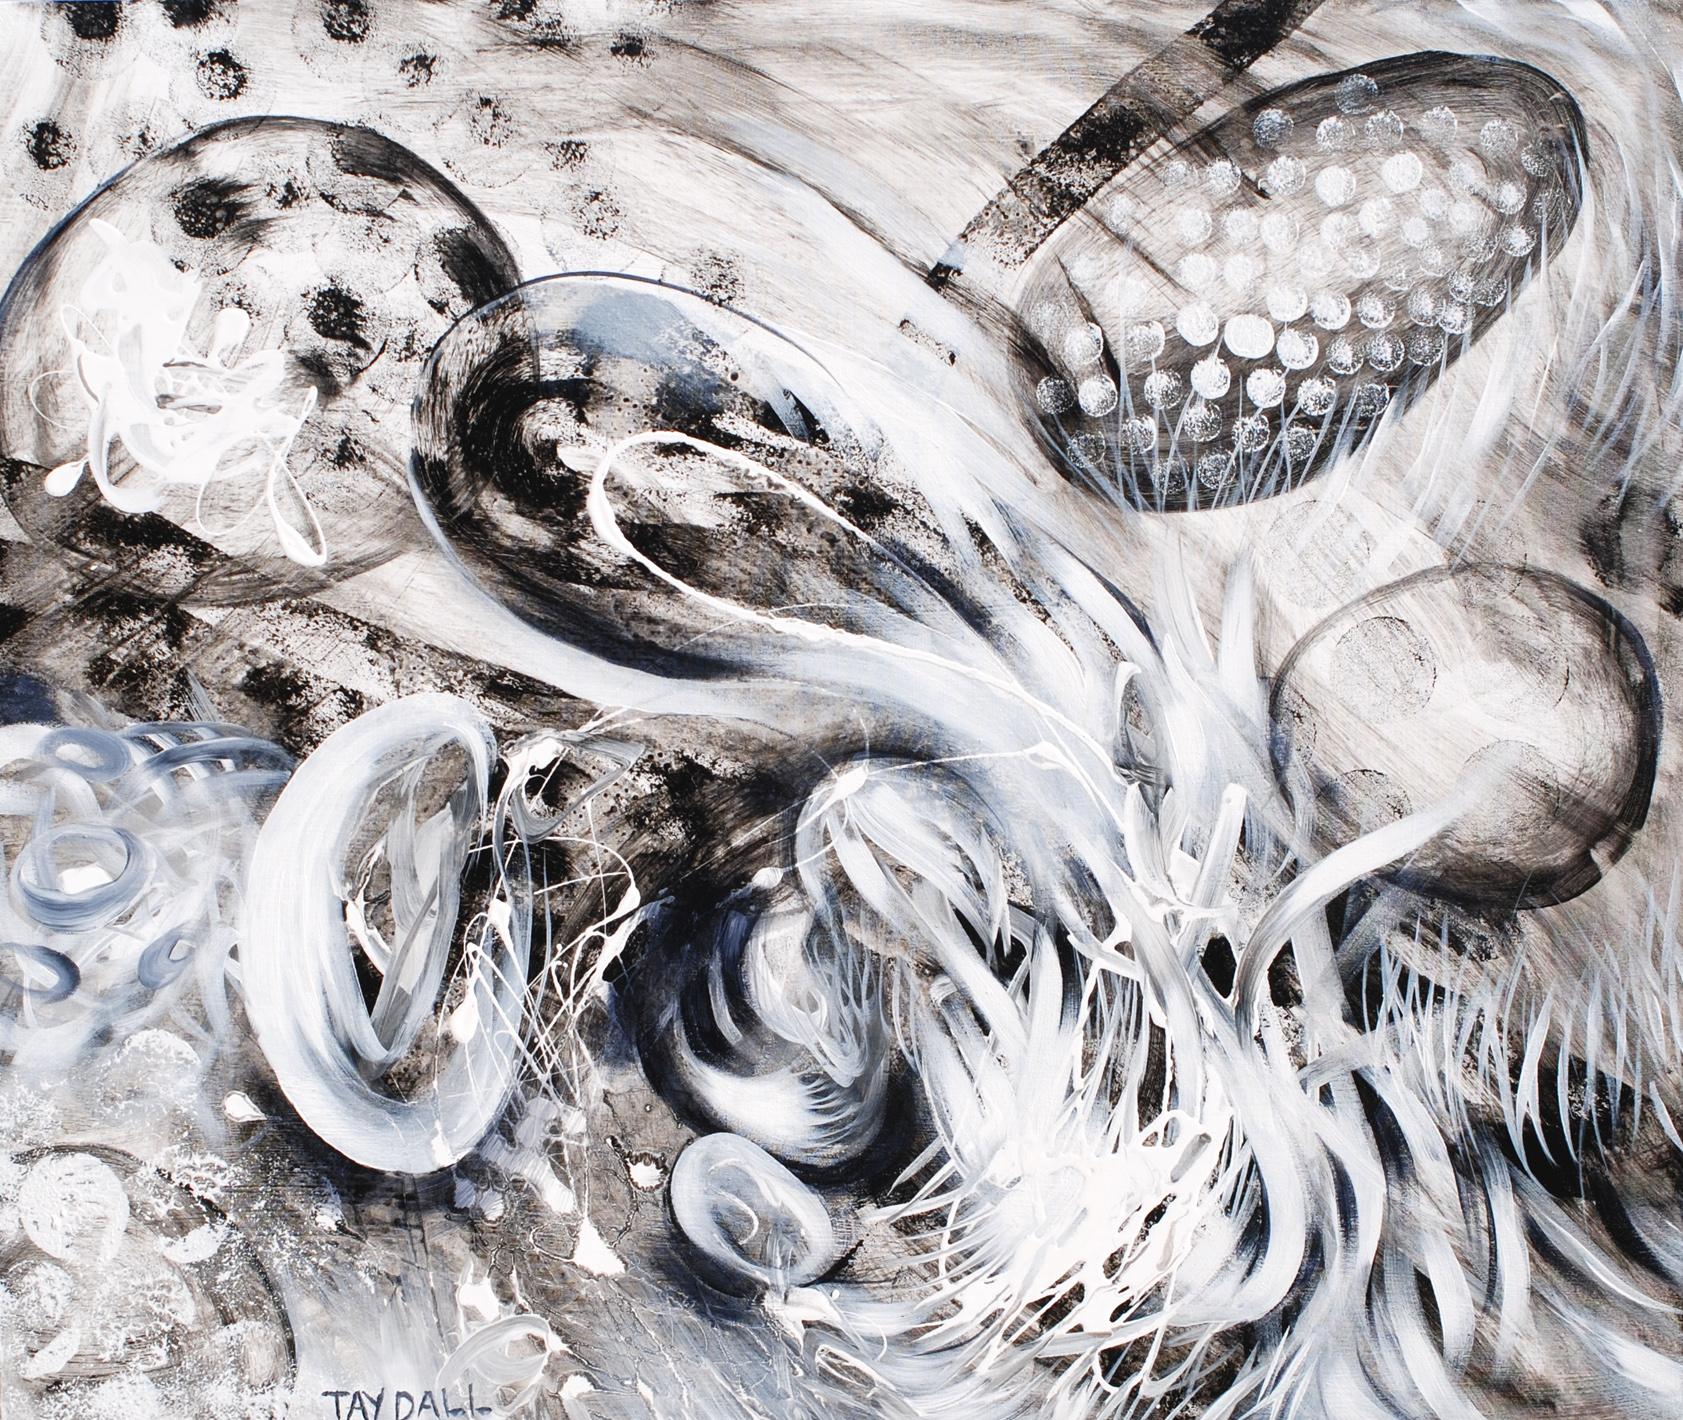 Tay Dall Abstract Painting - Black and White Abstract Oil Painting "Nest"